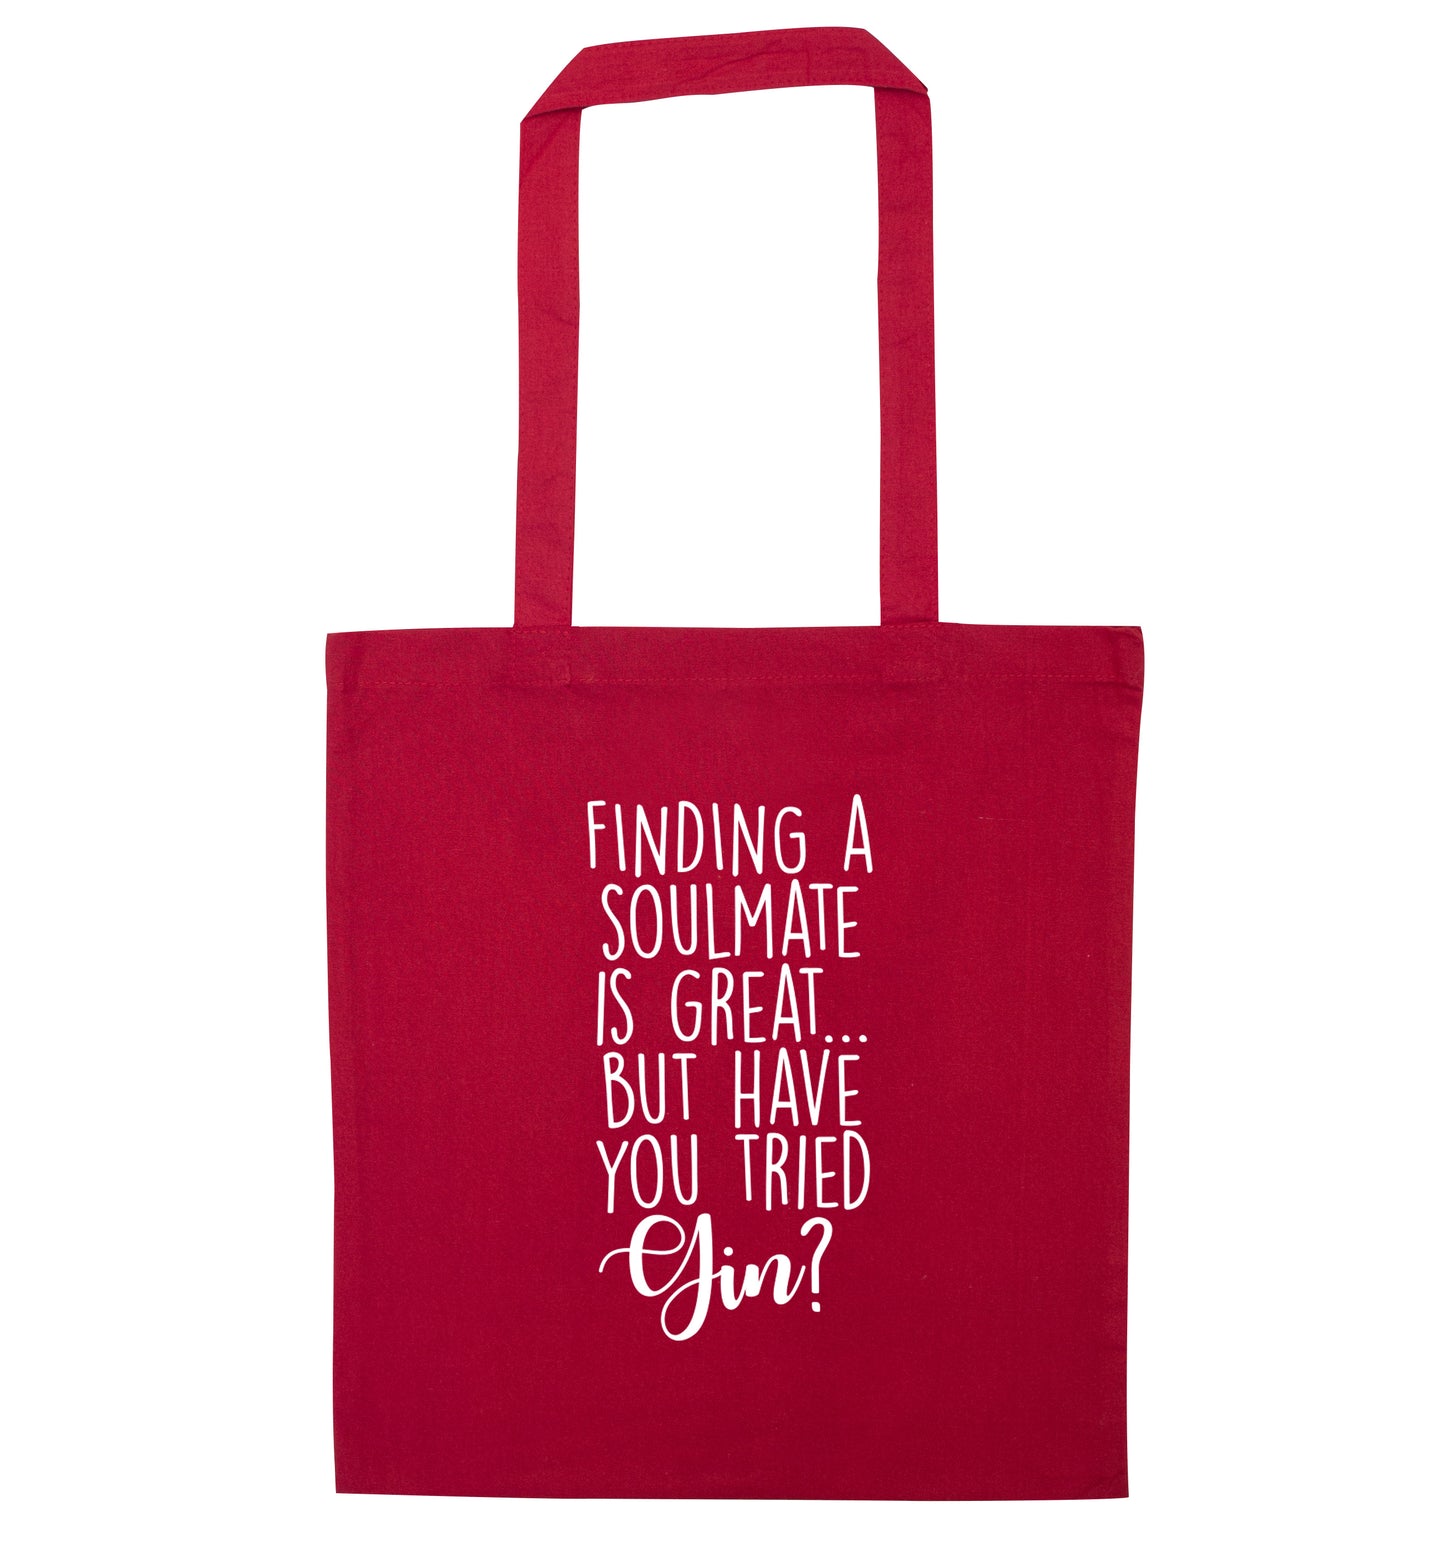 Finding a soulmate is great but have you tried gin? red tote bag